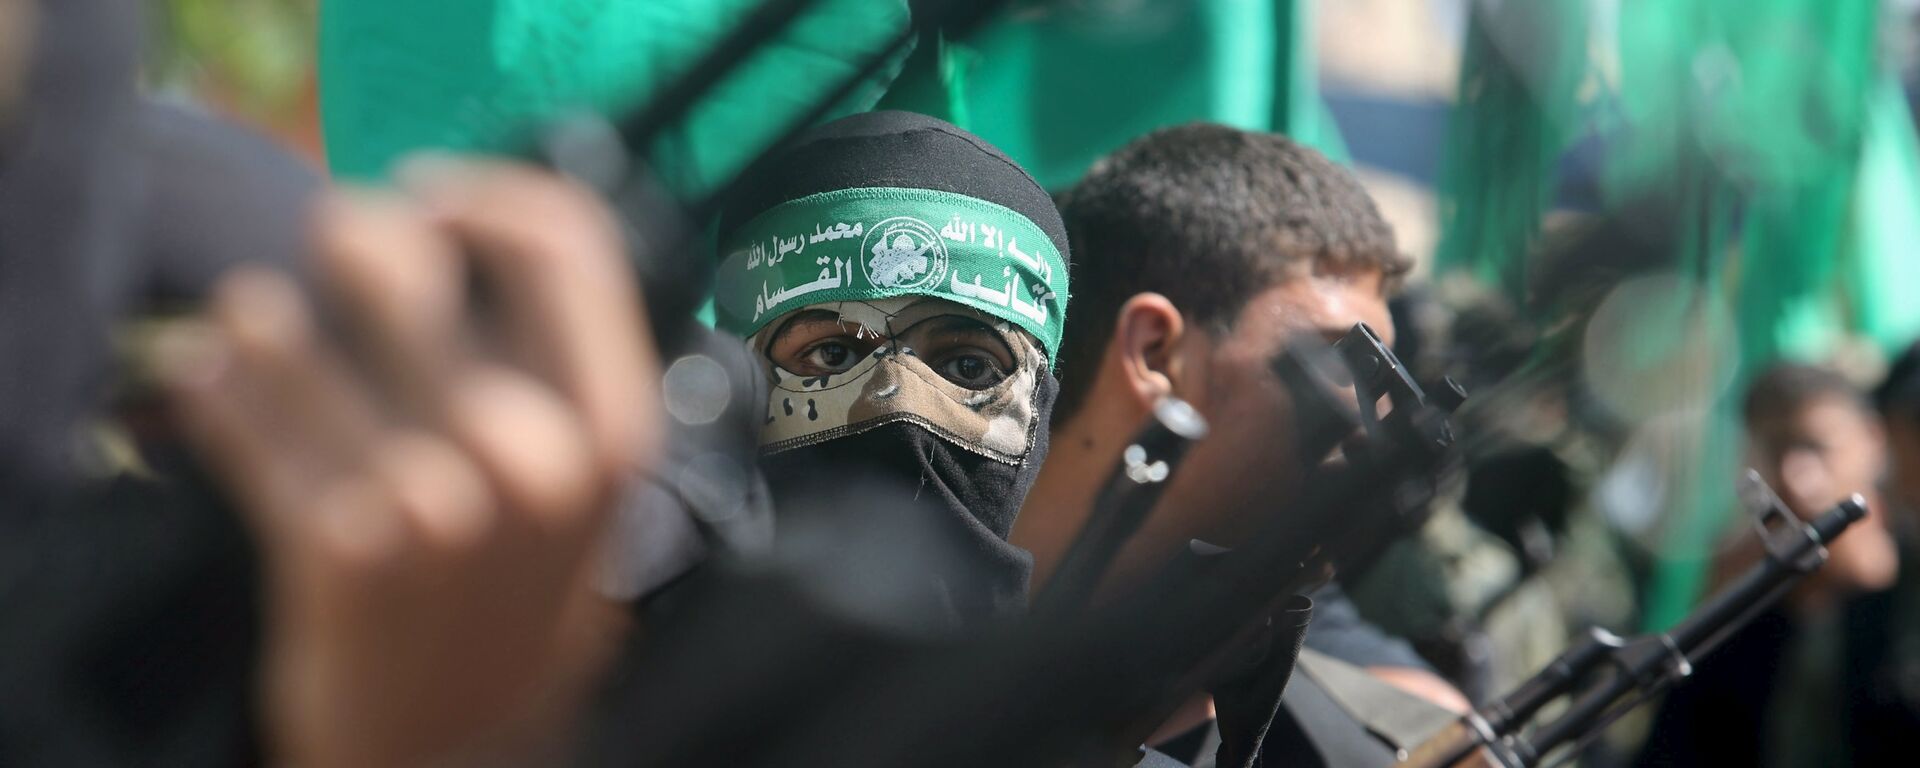 Palestinian Hamas militants take part in a protest against the Israeli police raid on Jerusalem's al-Aqsa mosque on Tuesday, in Khan Younis in the southern Gaza Strip, September 18, 2015. - Sputnik Mundo, 1920, 08.07.2021